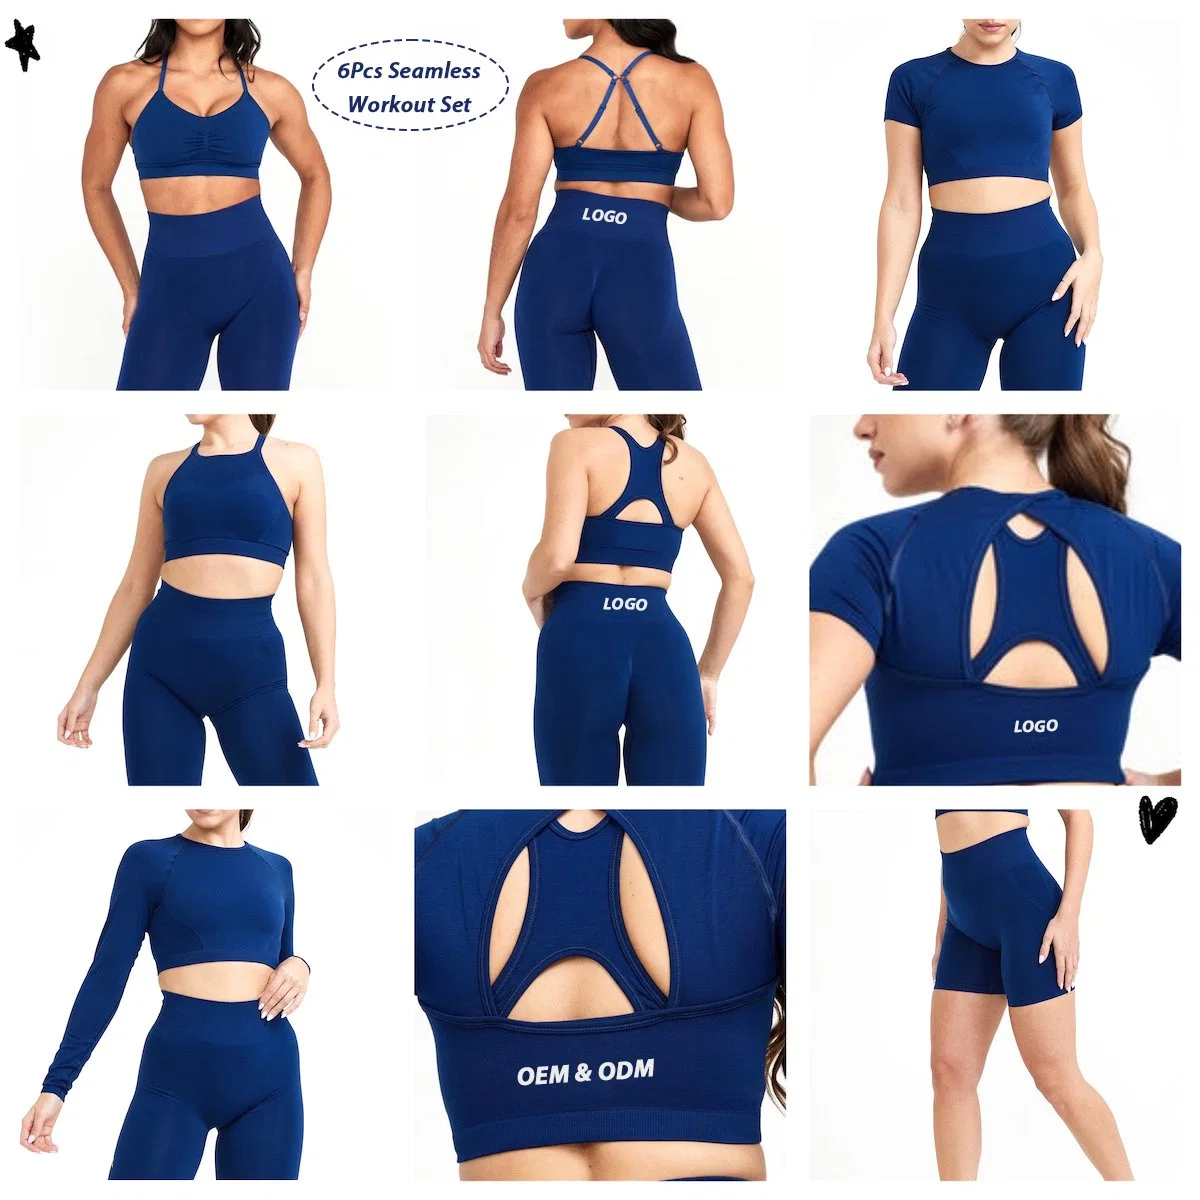 Wholesale/Supplier 6 Piece Exqusite Sexy Open Back Seamless Yoga Workout Clothes for Women, Custom Gym Bra + Crop Top + Running Shorts + Leggings Quality Activewear Set